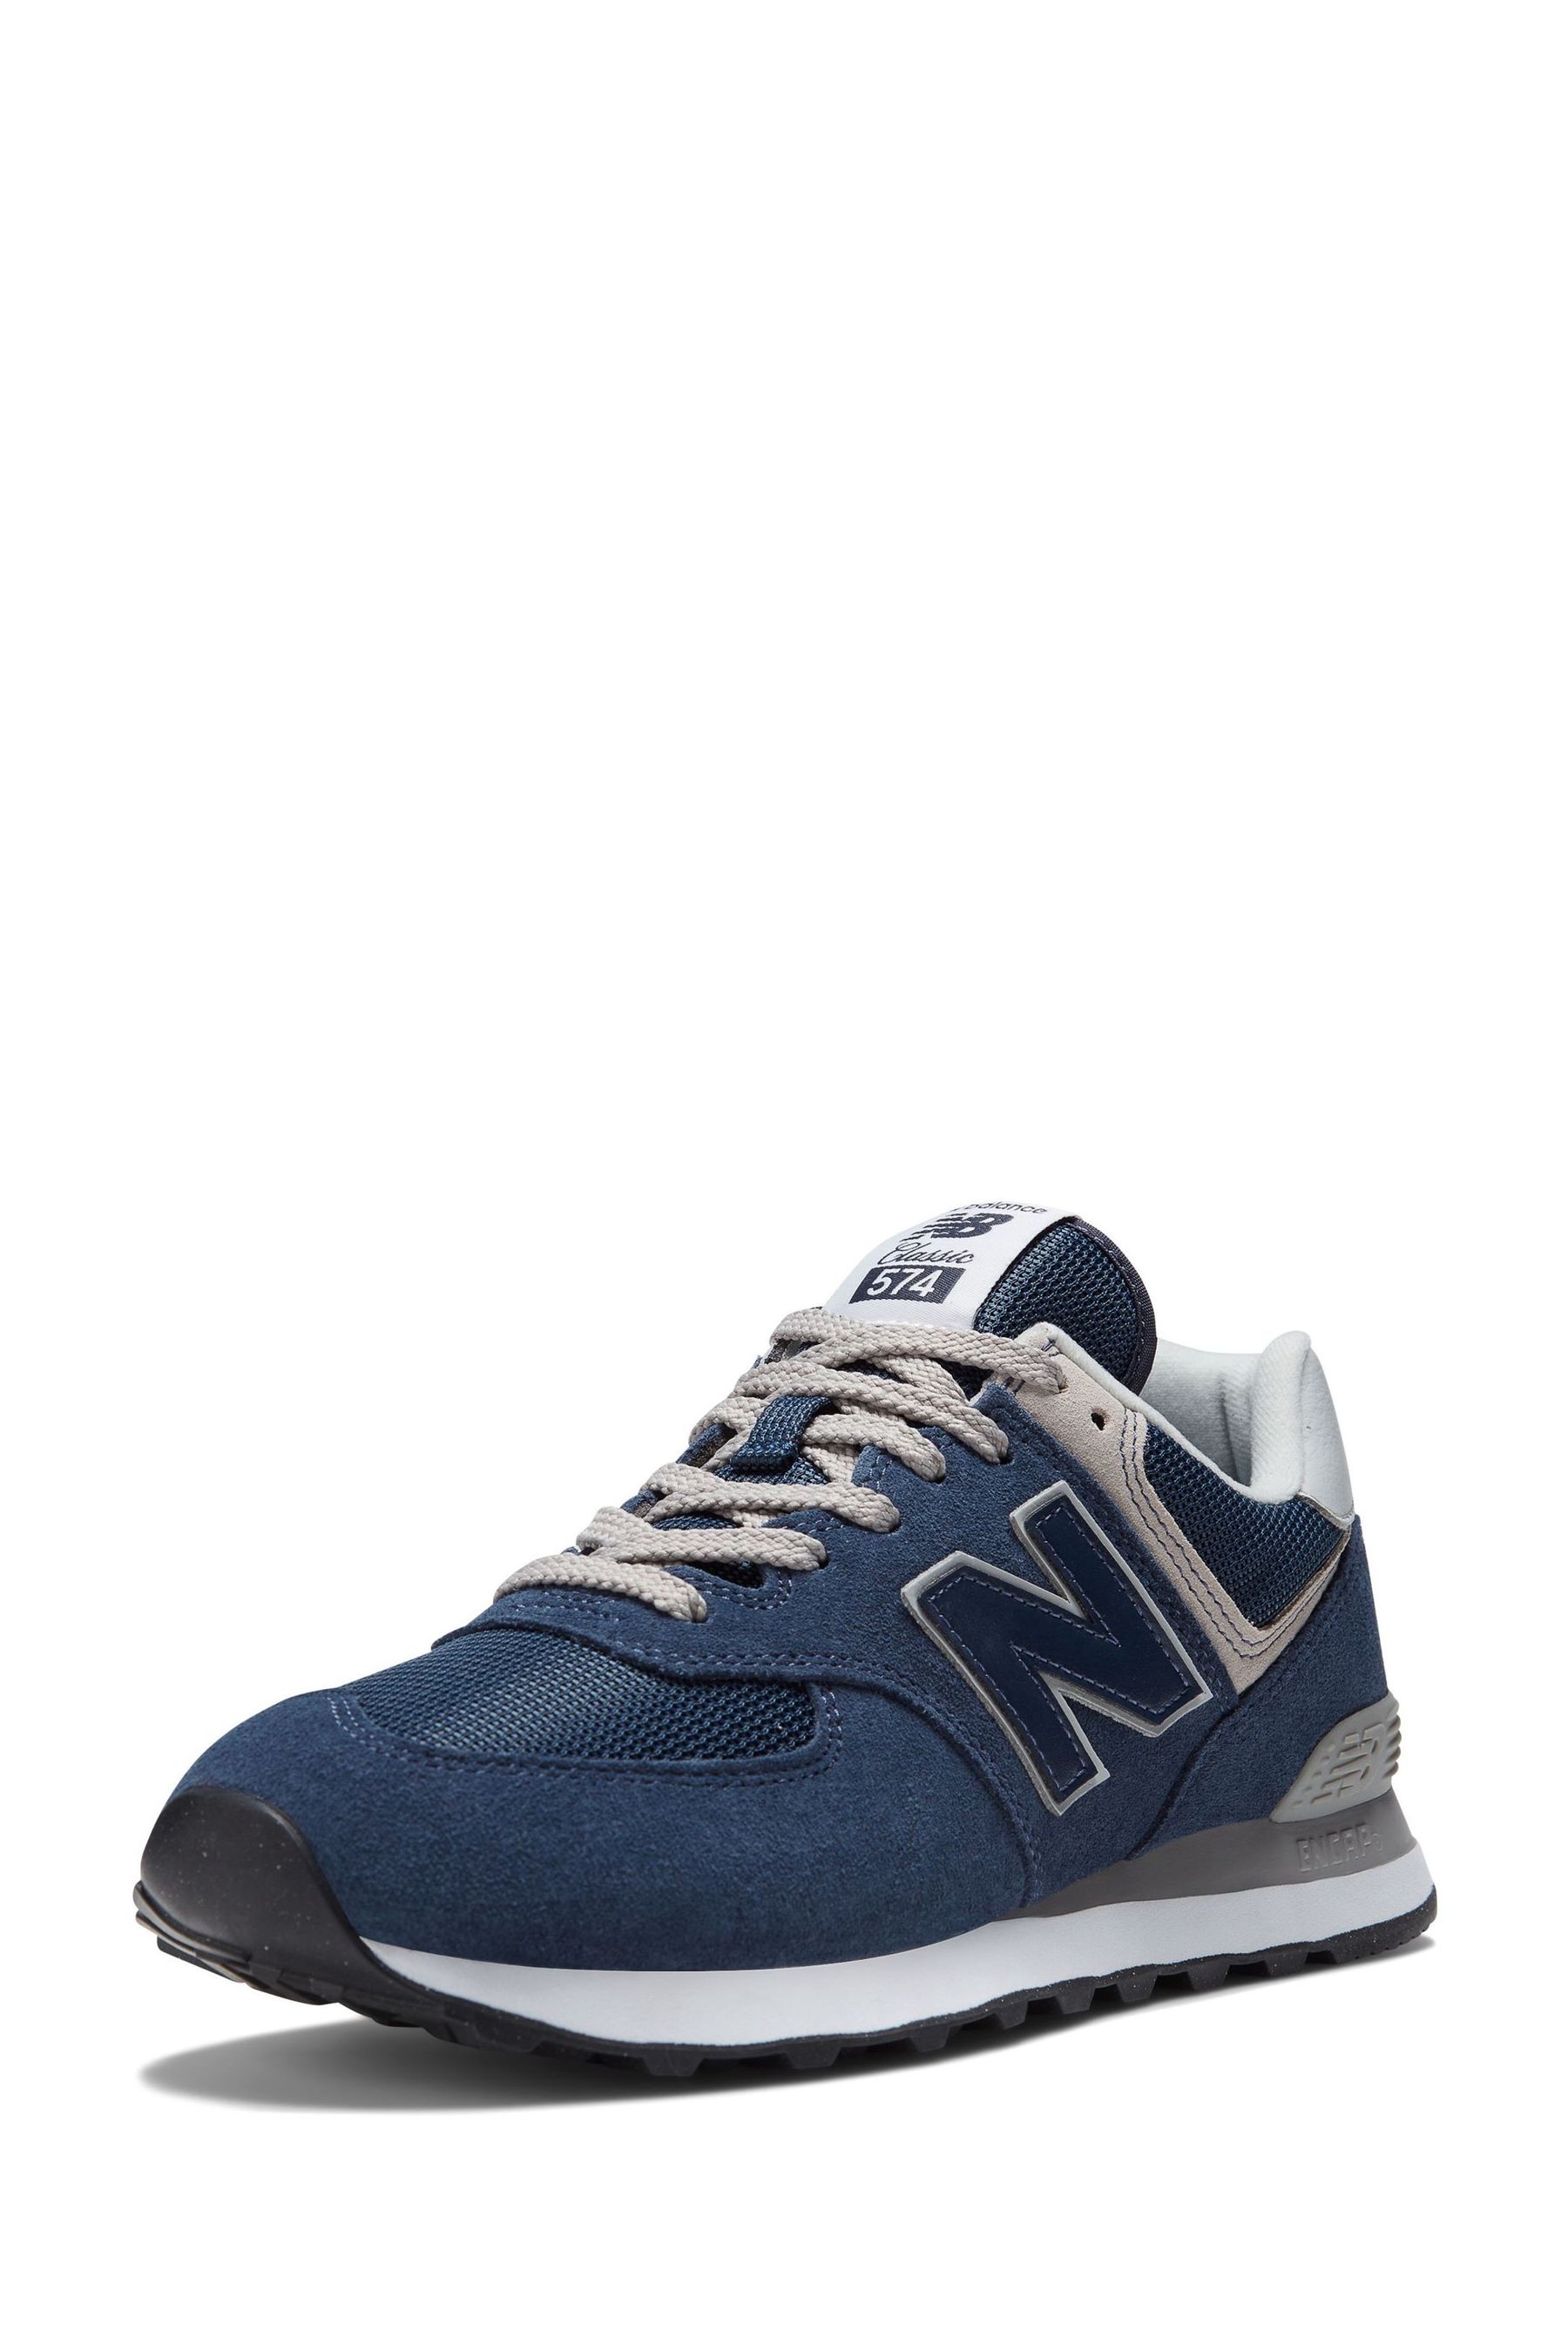 Buy New Balance Navy Blue Mens 574 Trainers from the Next UK online shop